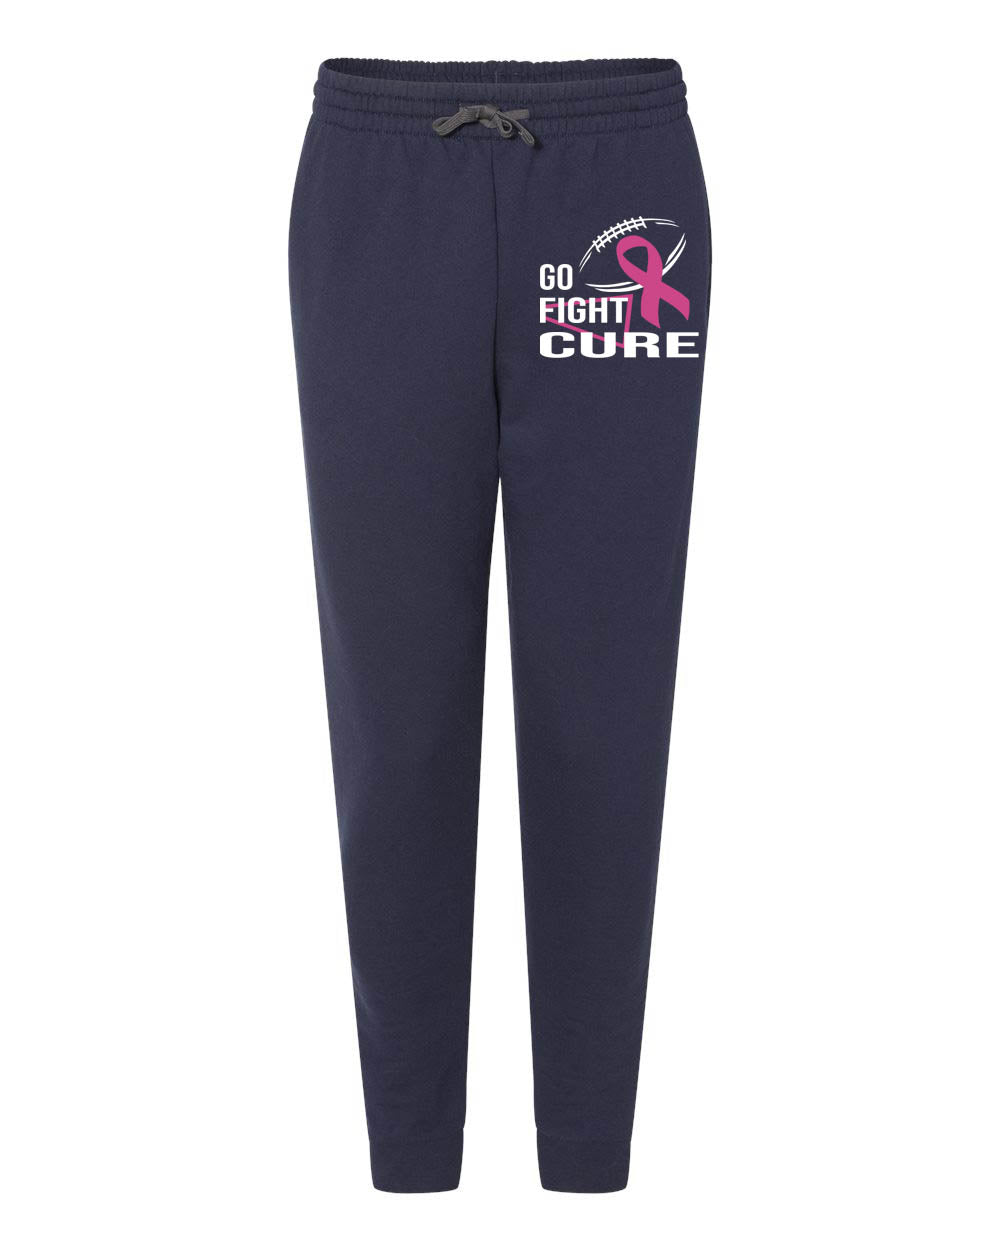 Go fight cure Cheer Sweatpants